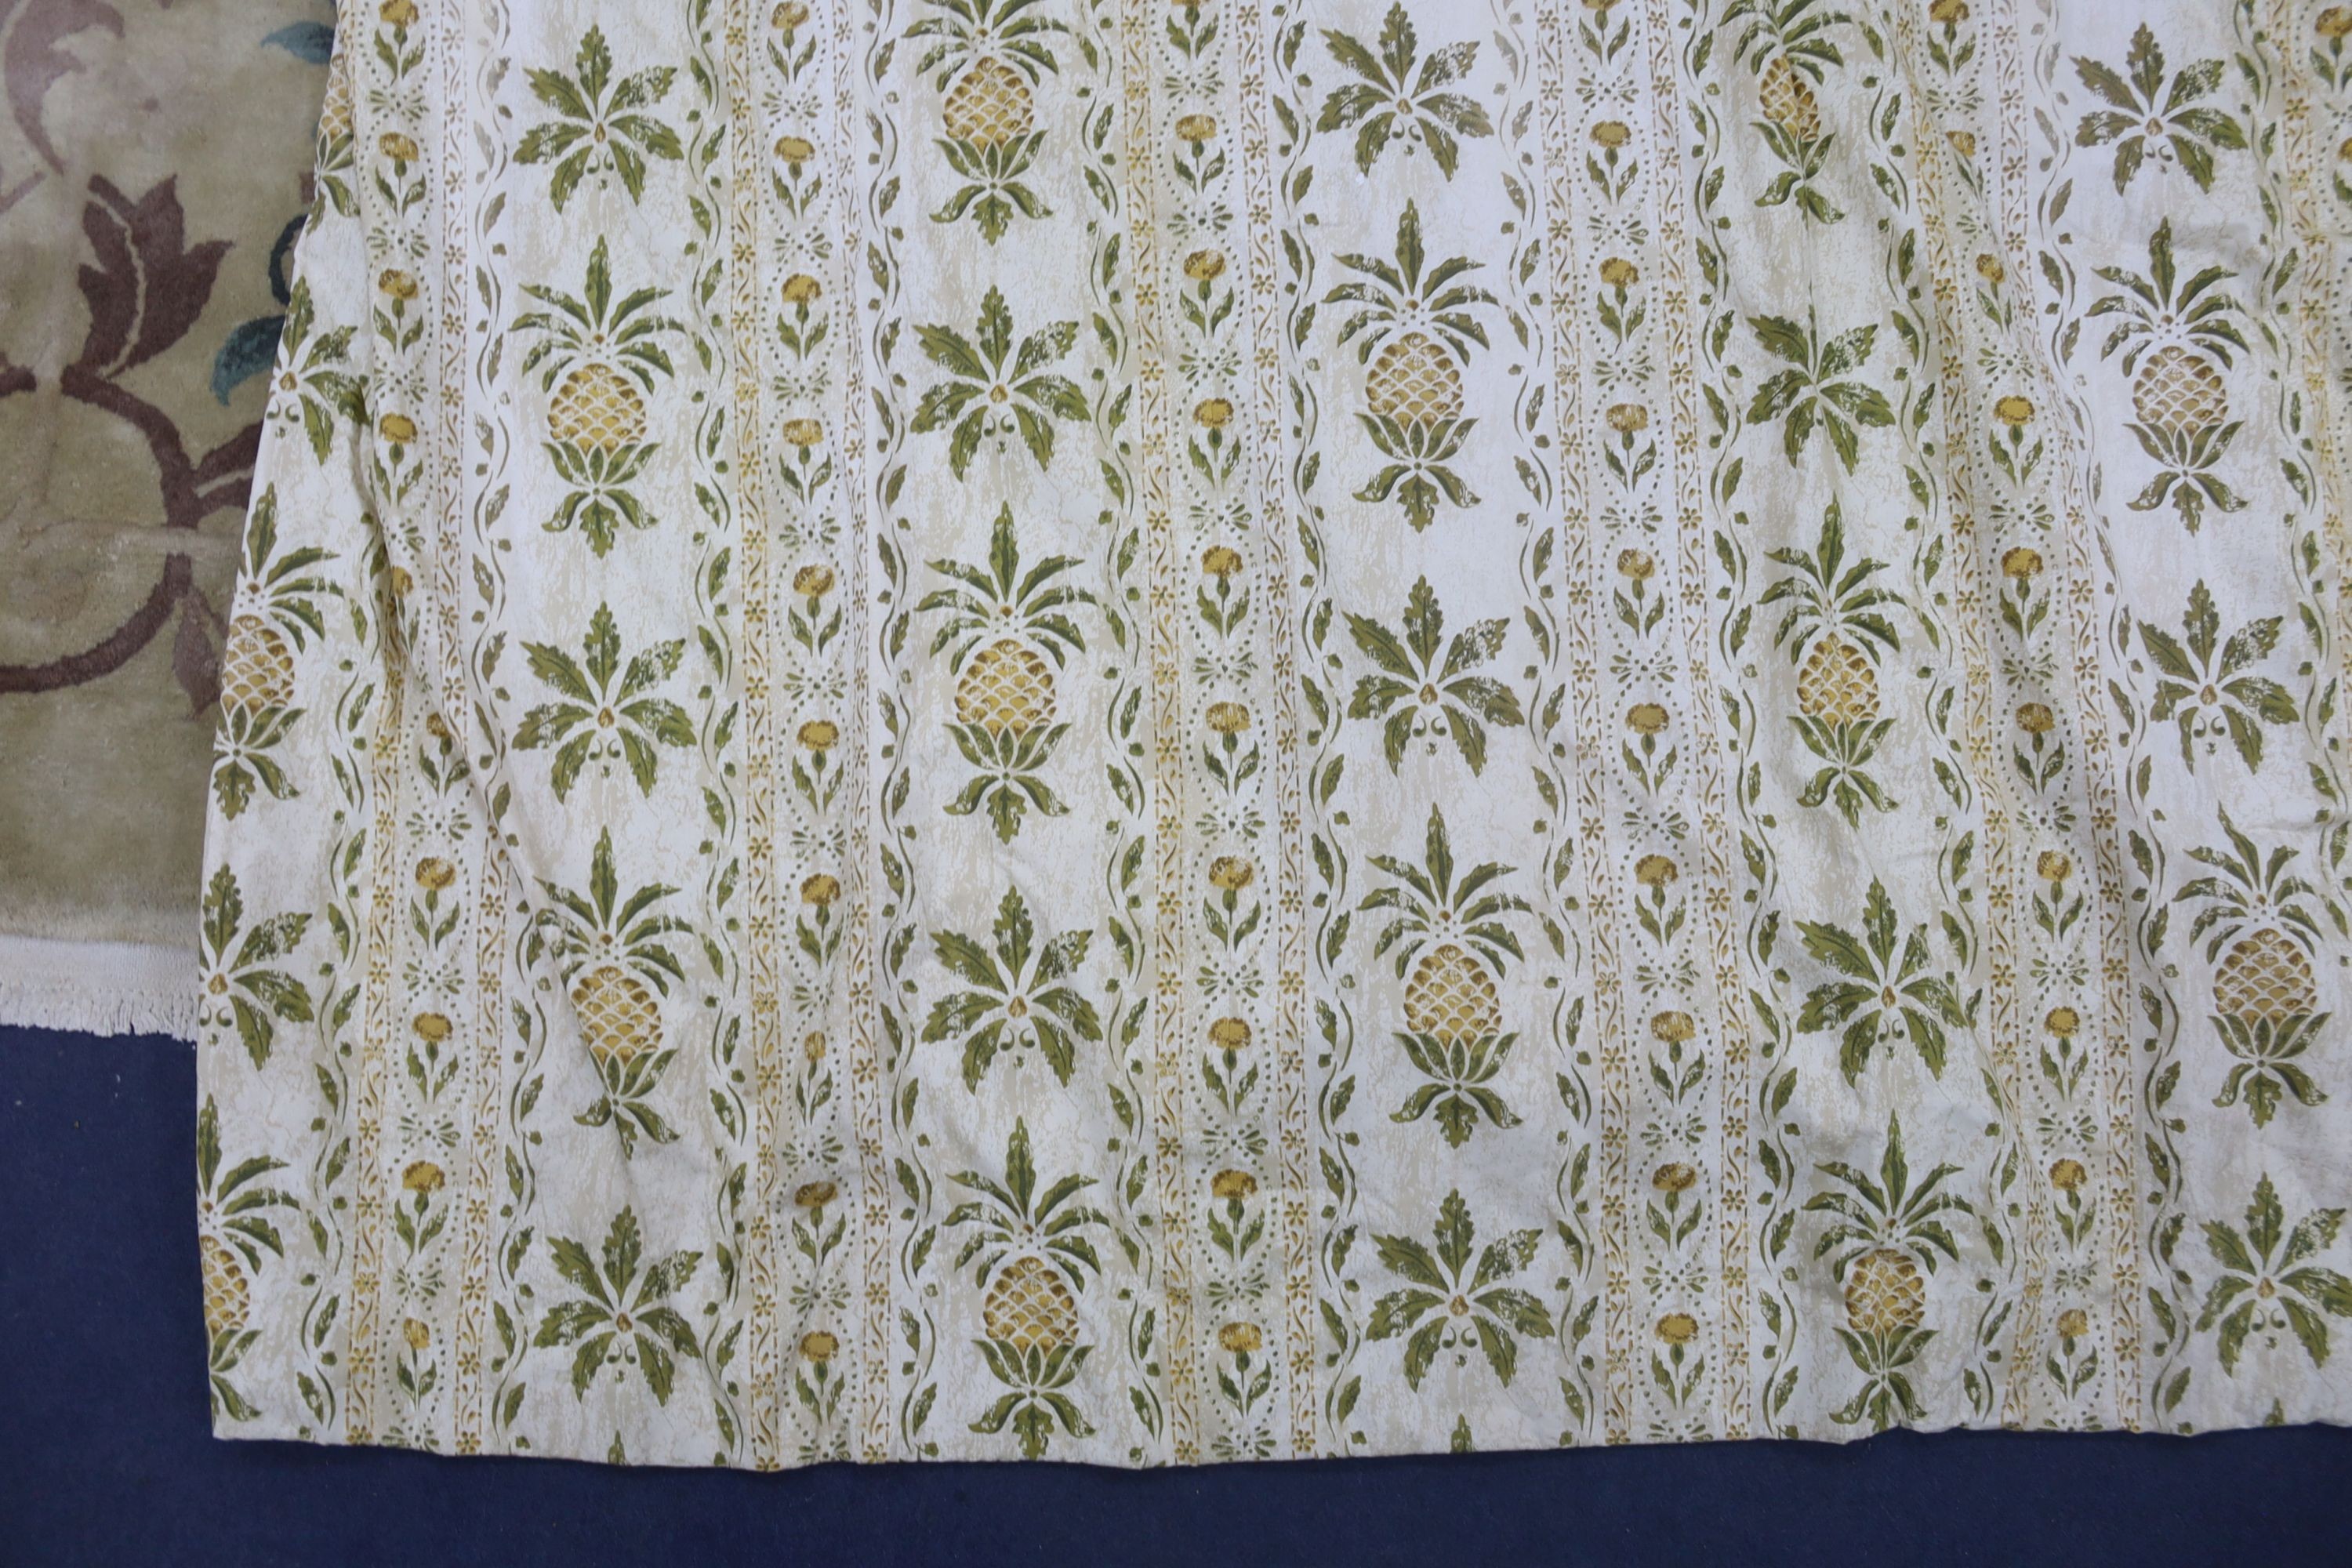 A pair of linen, 'Morris' style curtains and another pair of cotton curtains with a pineapple design